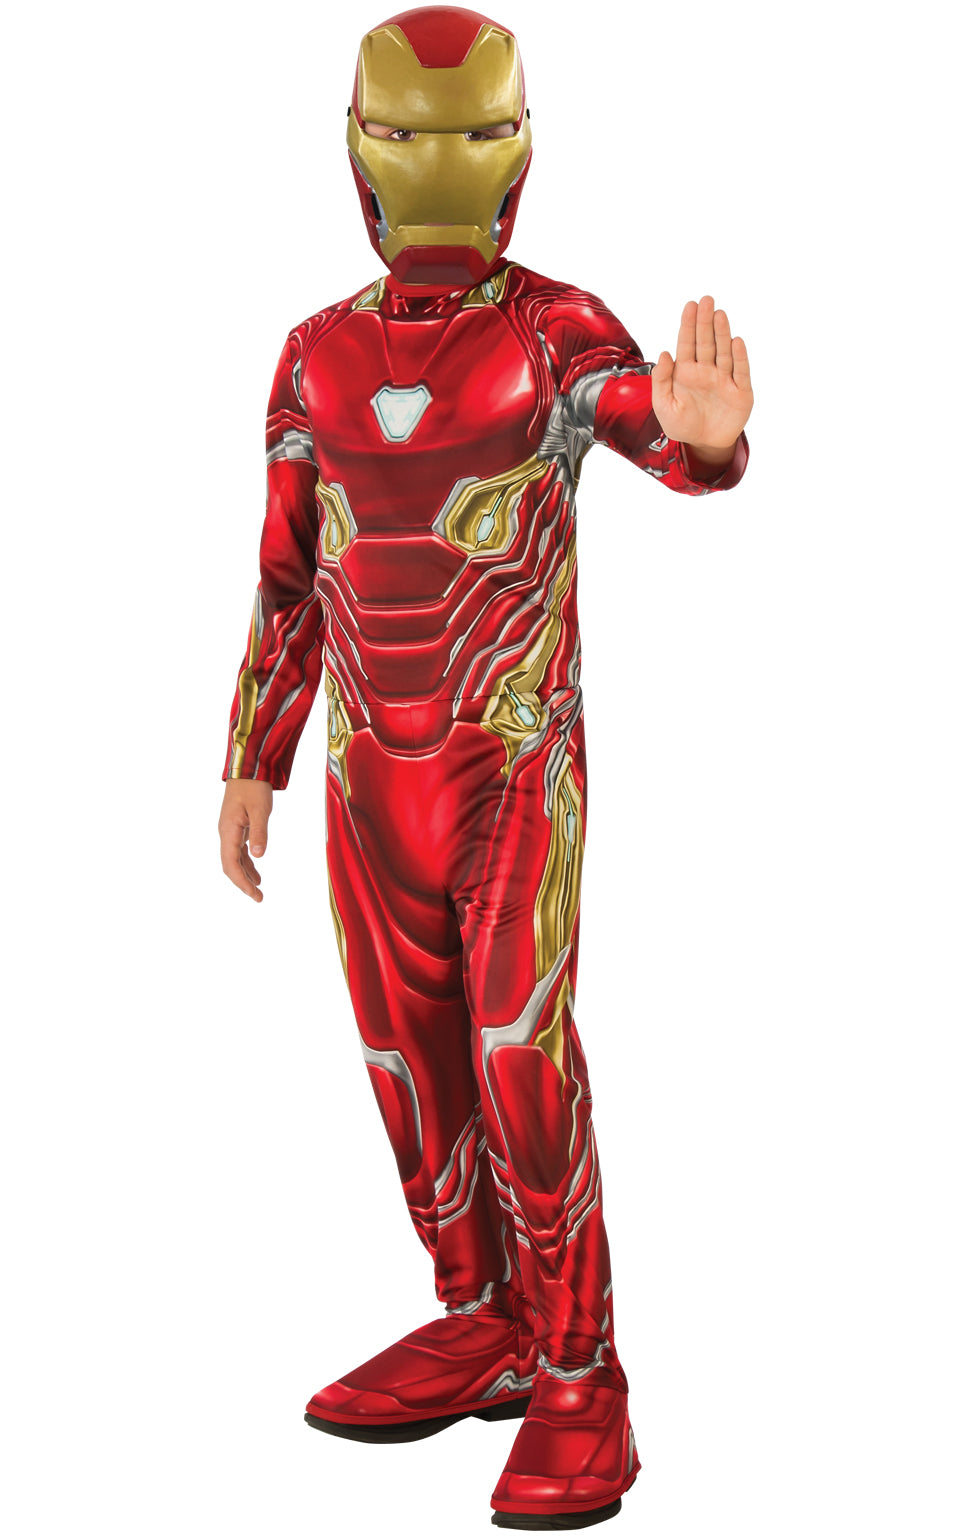 This child's Ironman outfit features a jumpsuit with attached shoe covers and mask.